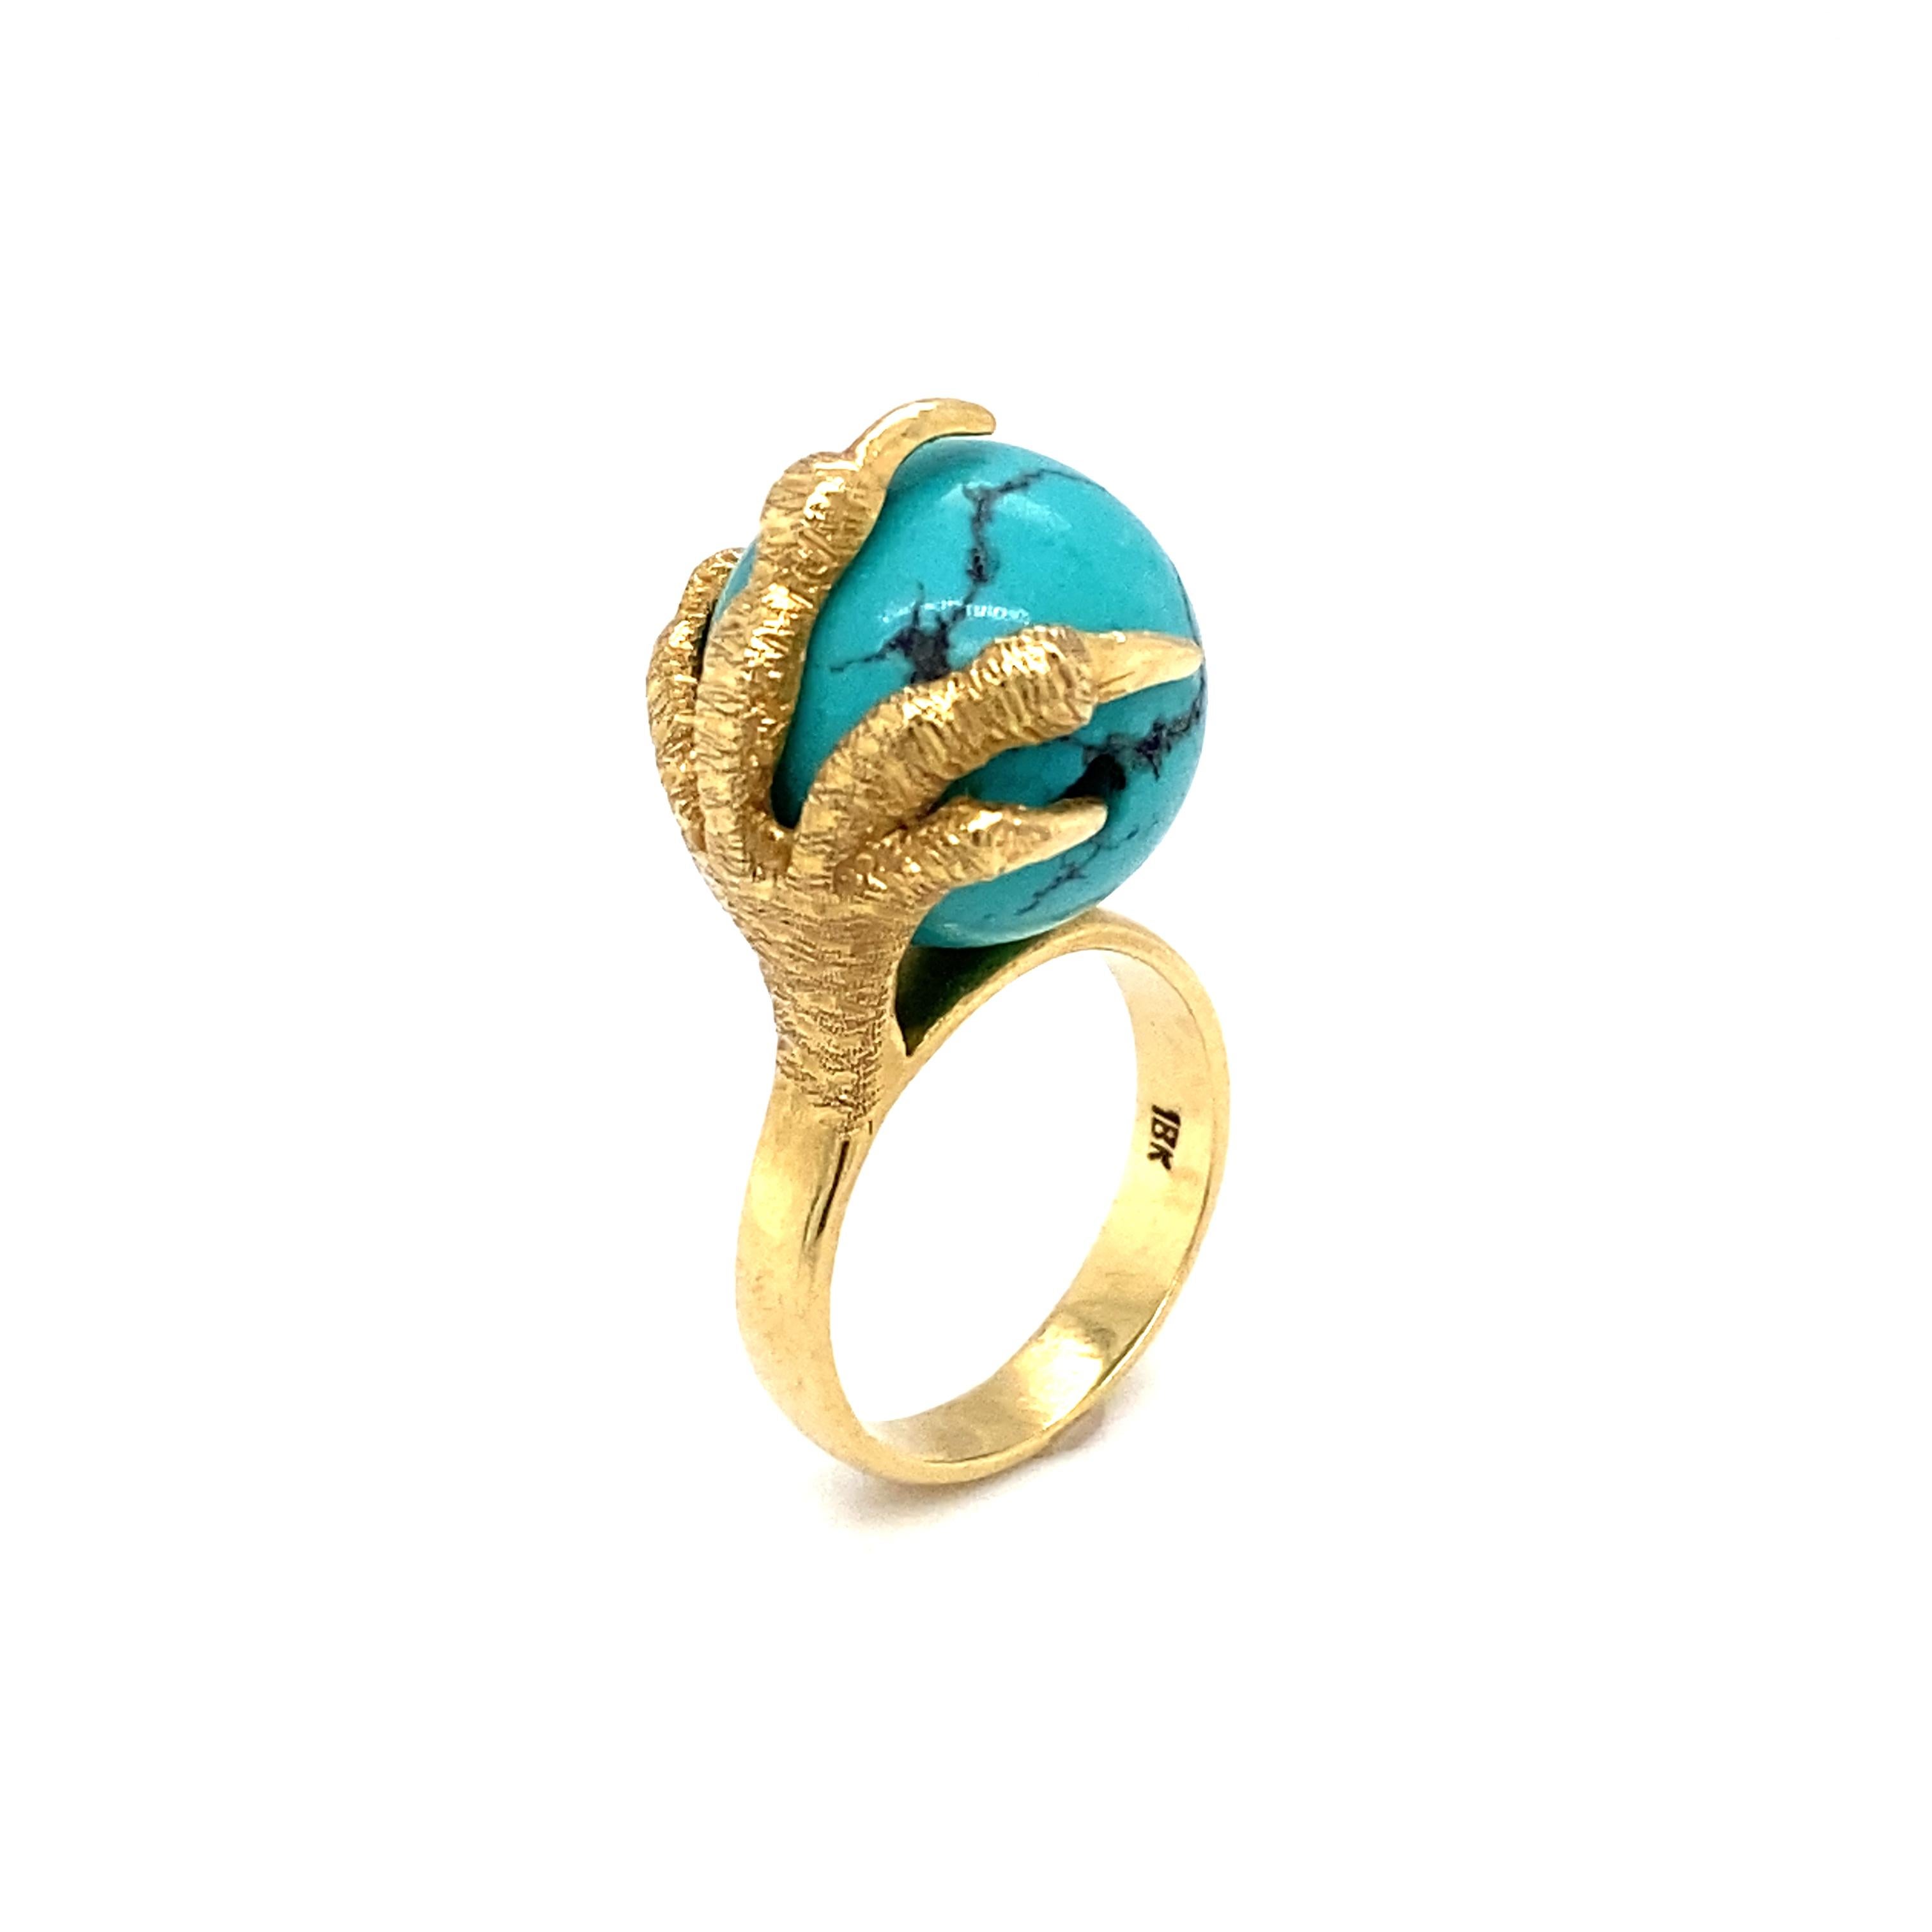 Here we have a stunning ring from the 1970s featuring a beautiful, rather ornate, turquoise, held by talon prongs, seemingly belonging to a bird of some sort. The claw talons are very heavily detailed. They are crafted in 18 Karat Yellow Gold, and